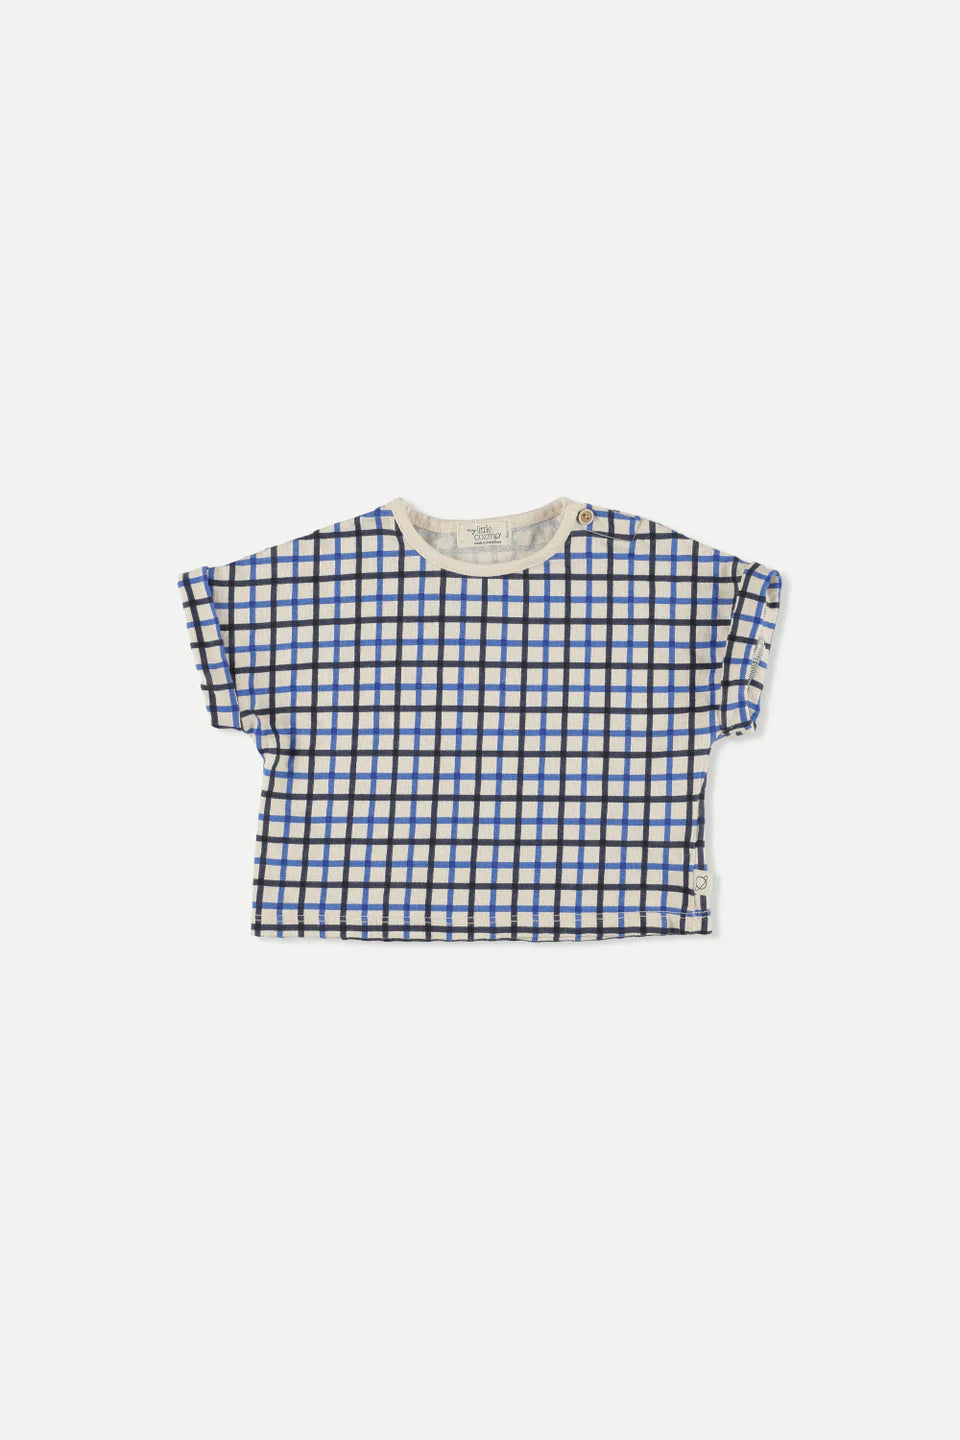 MY LITTLE COZMO NAVY CHECKED TOP [FINAL SALE]